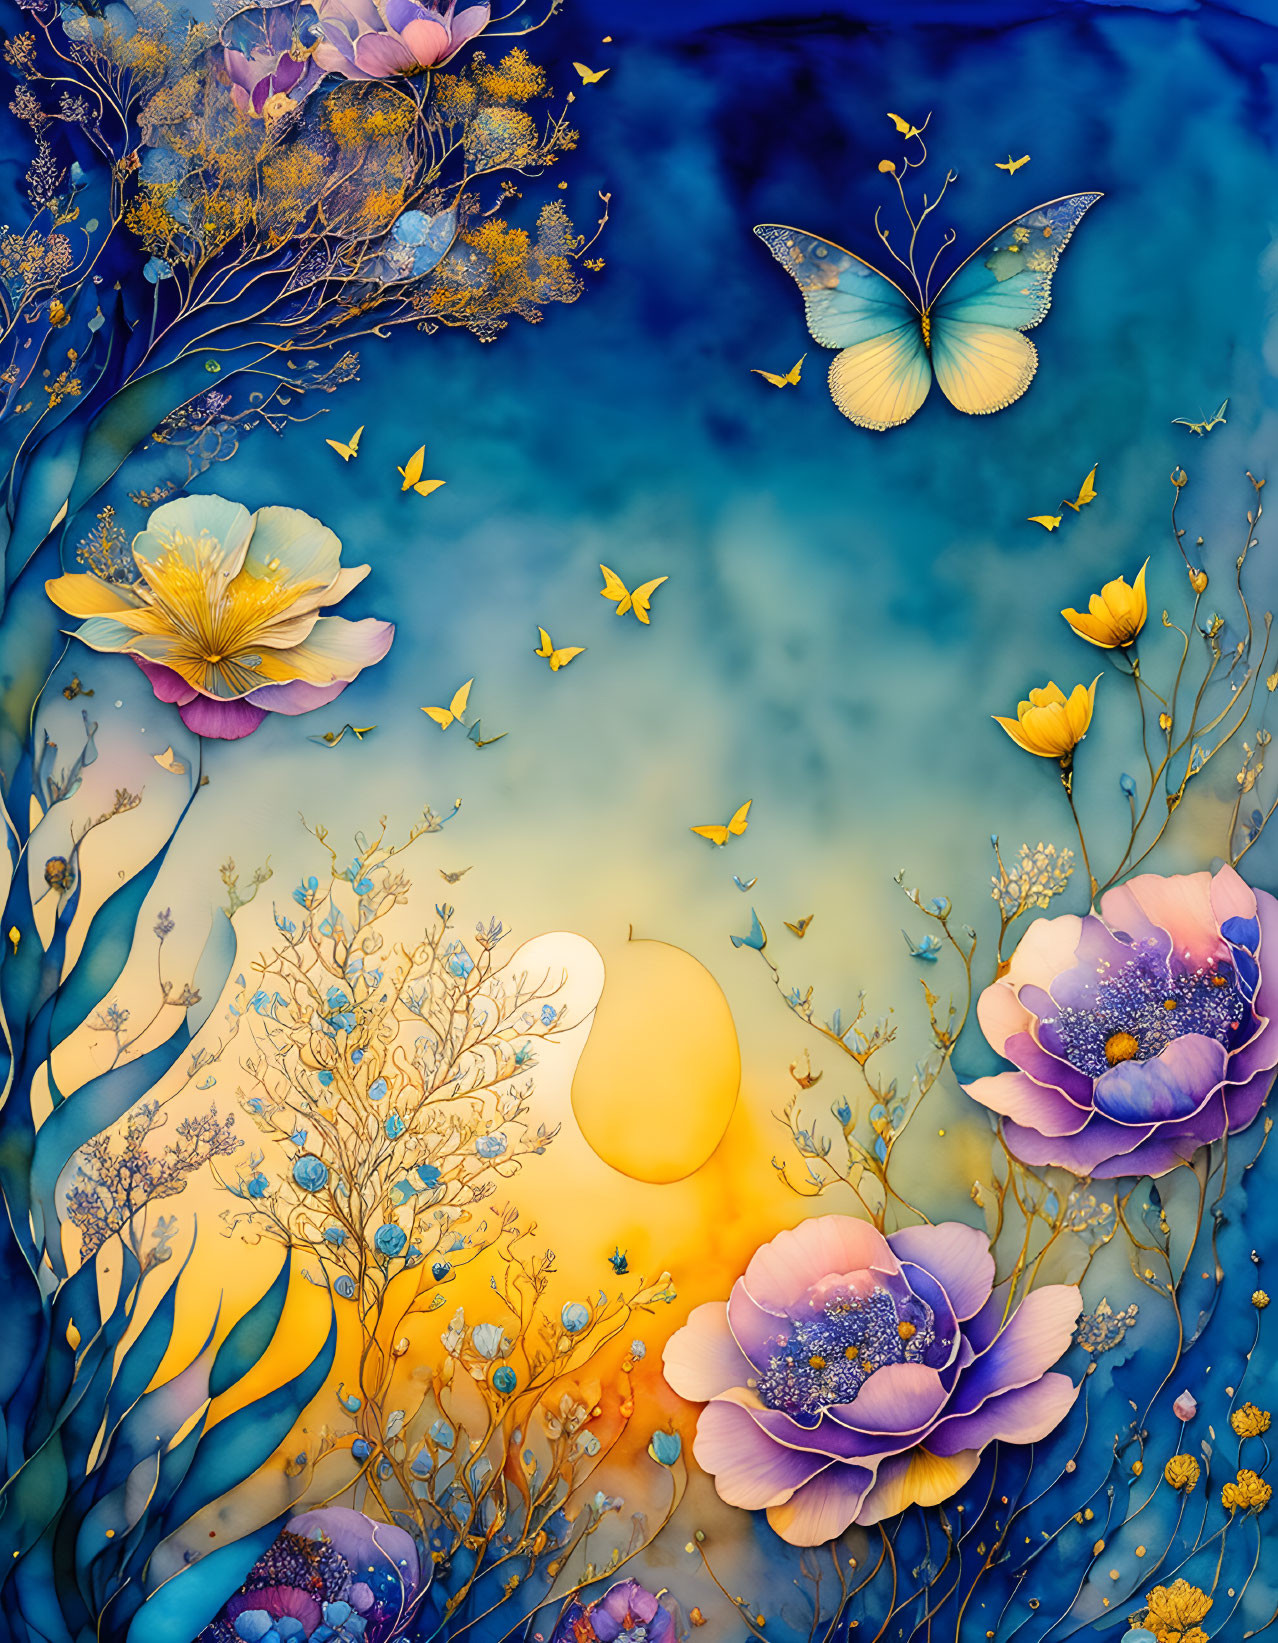 Colorful artwork with gradient blue to yellow background and stylized flora, butterfly, birds, and sun